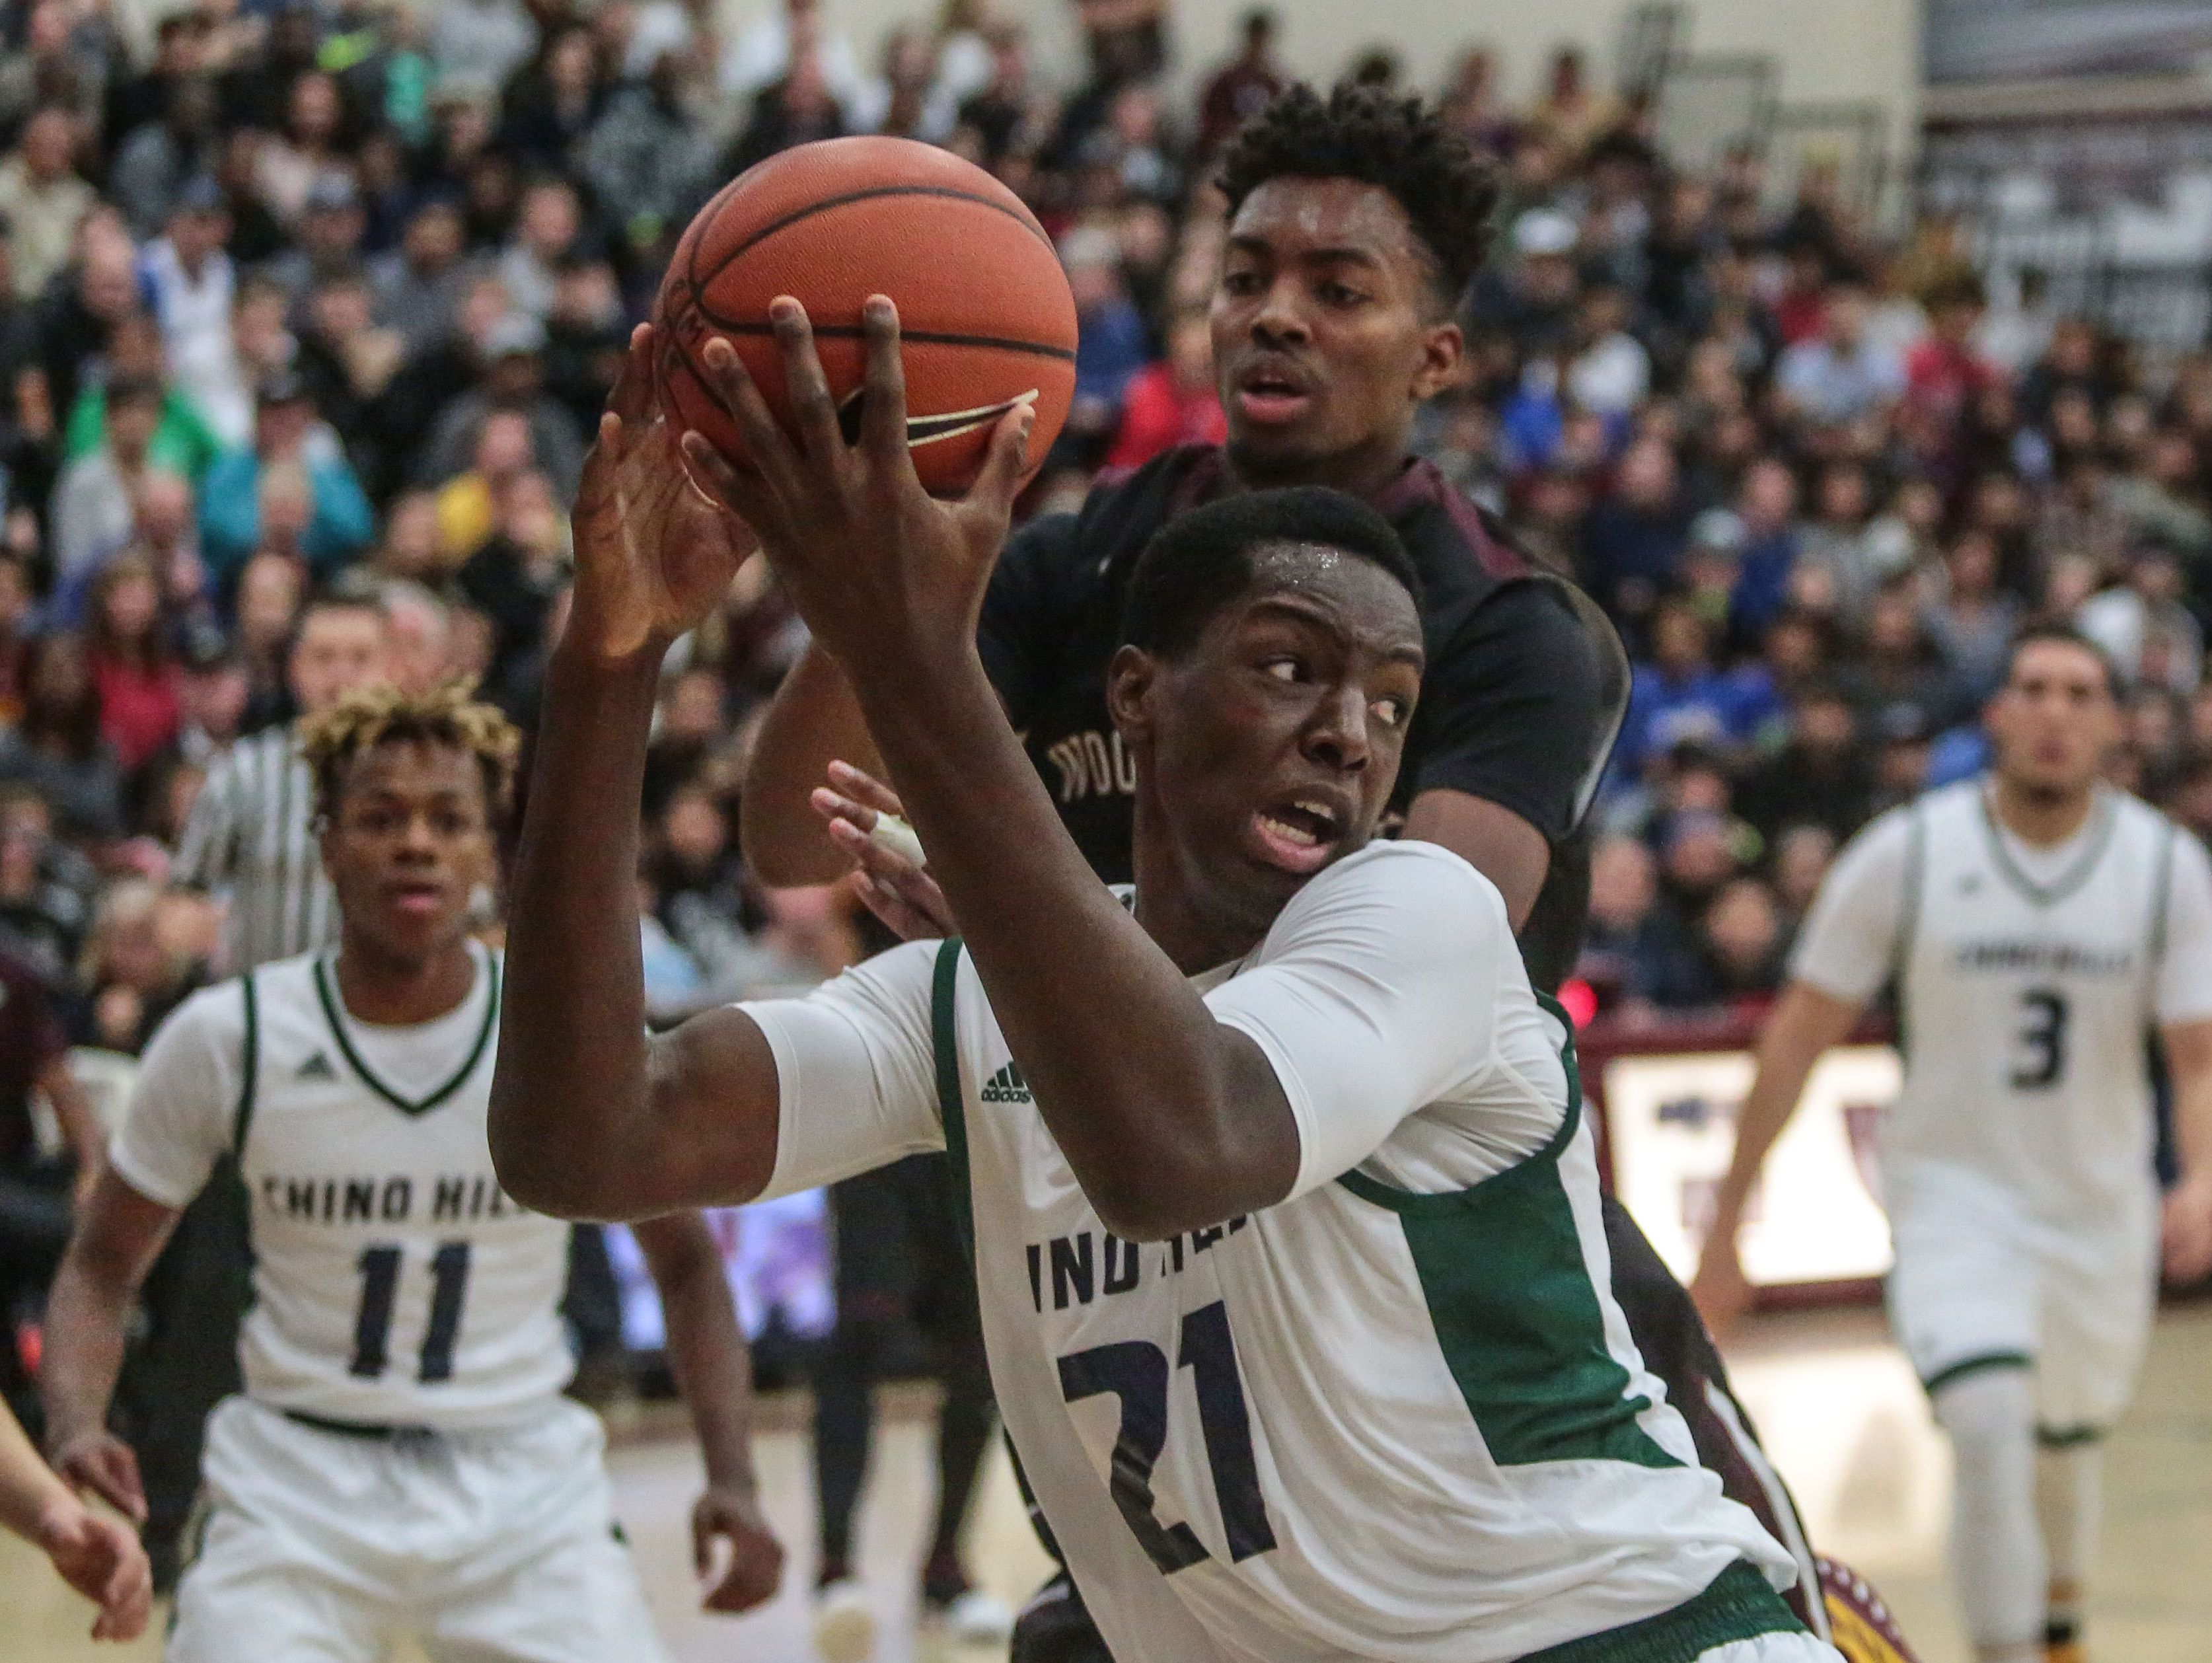 Chino Hills and Woodcreek basketball action on Wednesday, December 28, 2016 during the Rancho Mirage Holiday Invitational at Rancho Mirage High School.